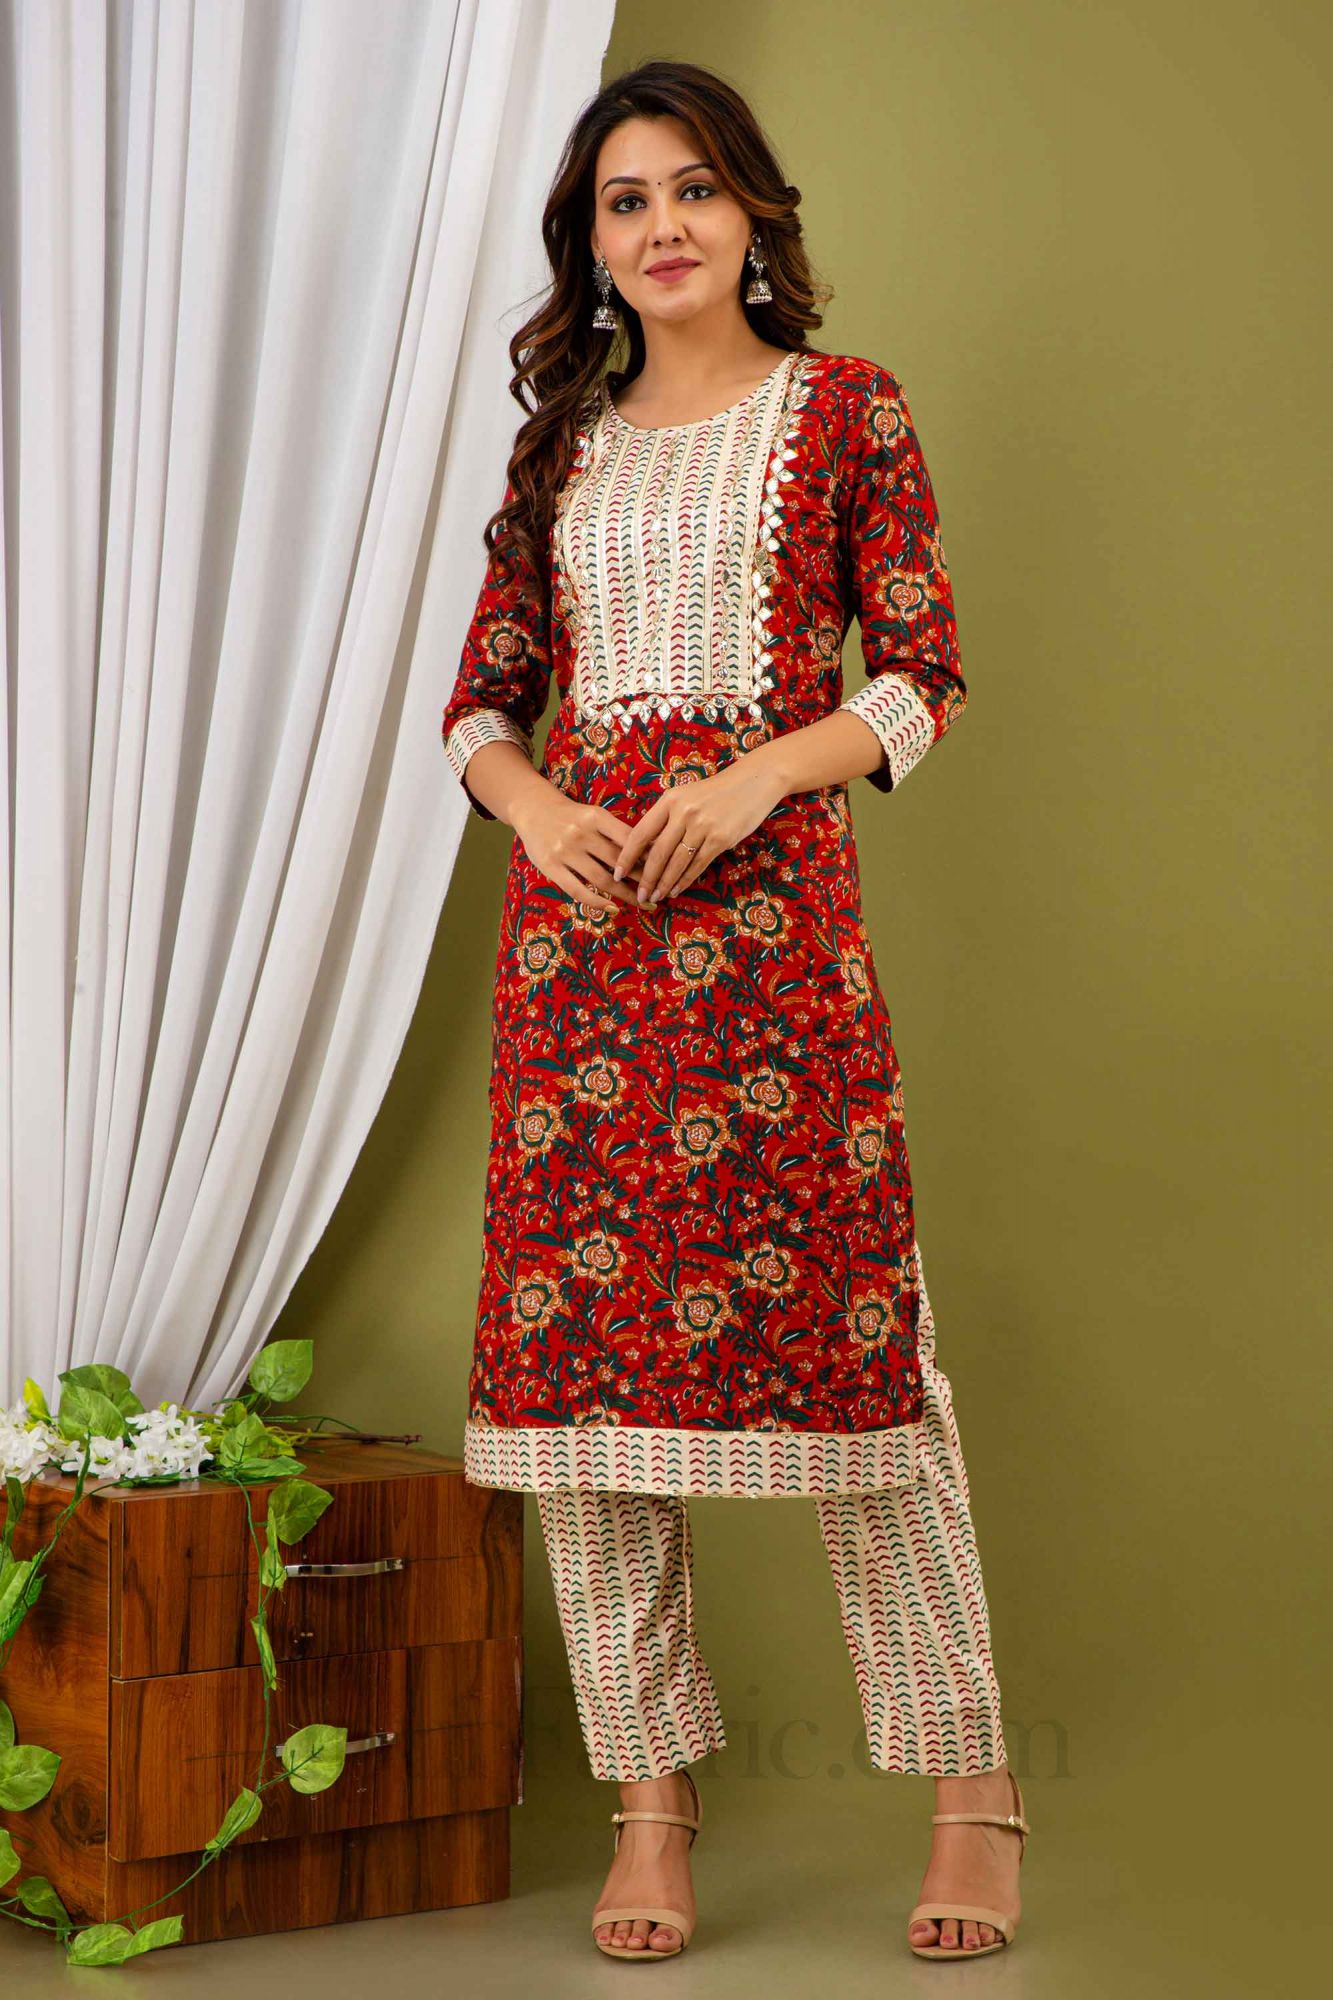 NEW PRESENR ROUND KURTI at Rs.300/Piece in surat offer by yct shopping